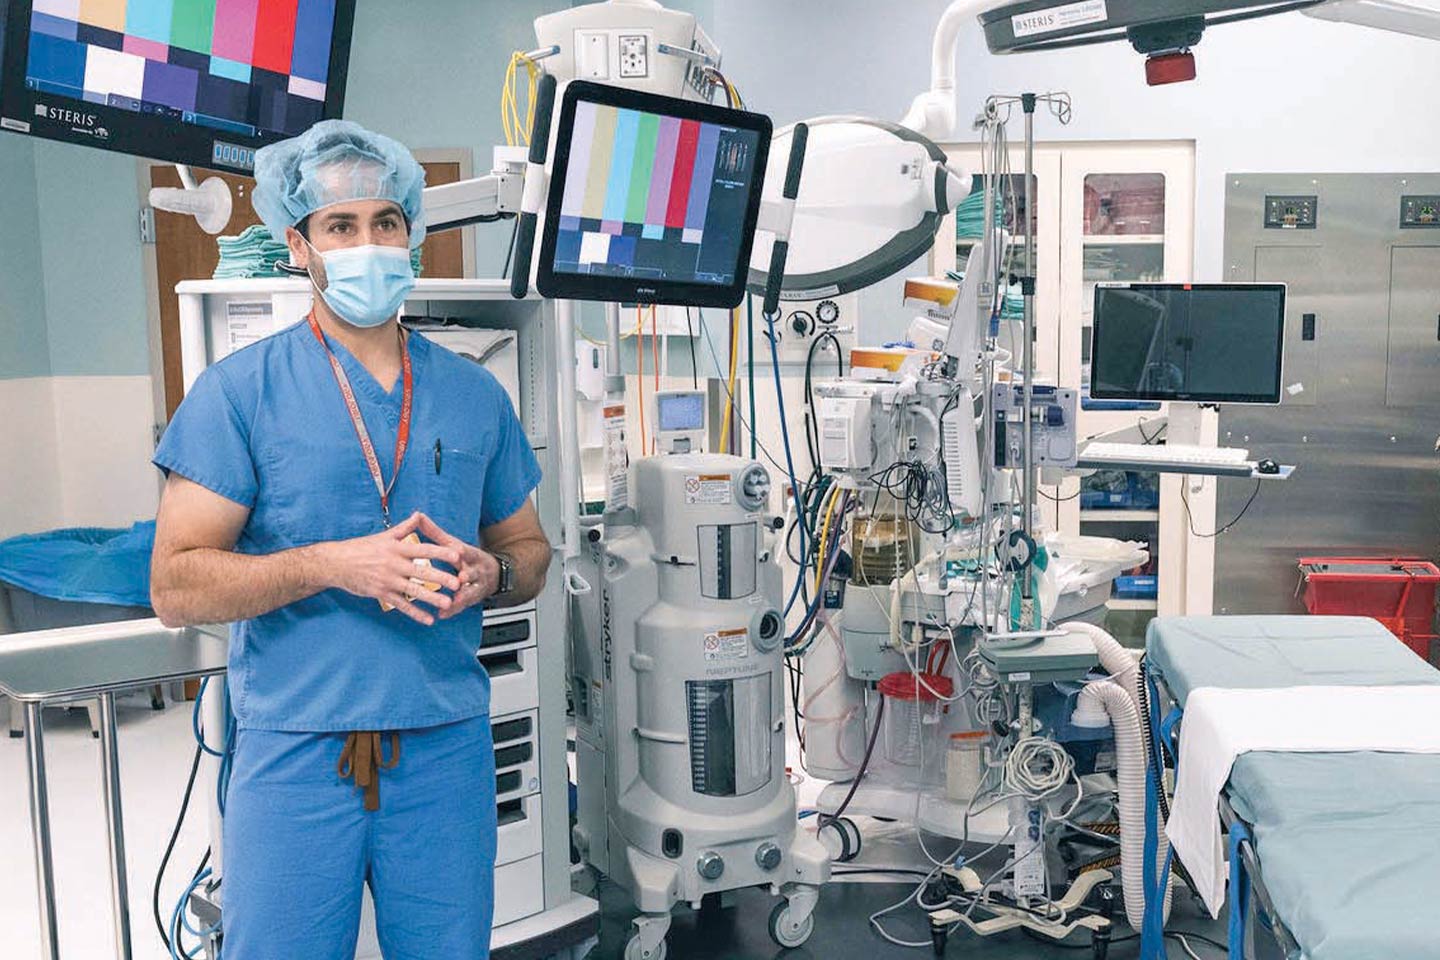 doctor wearing scrubs standing in the operating room